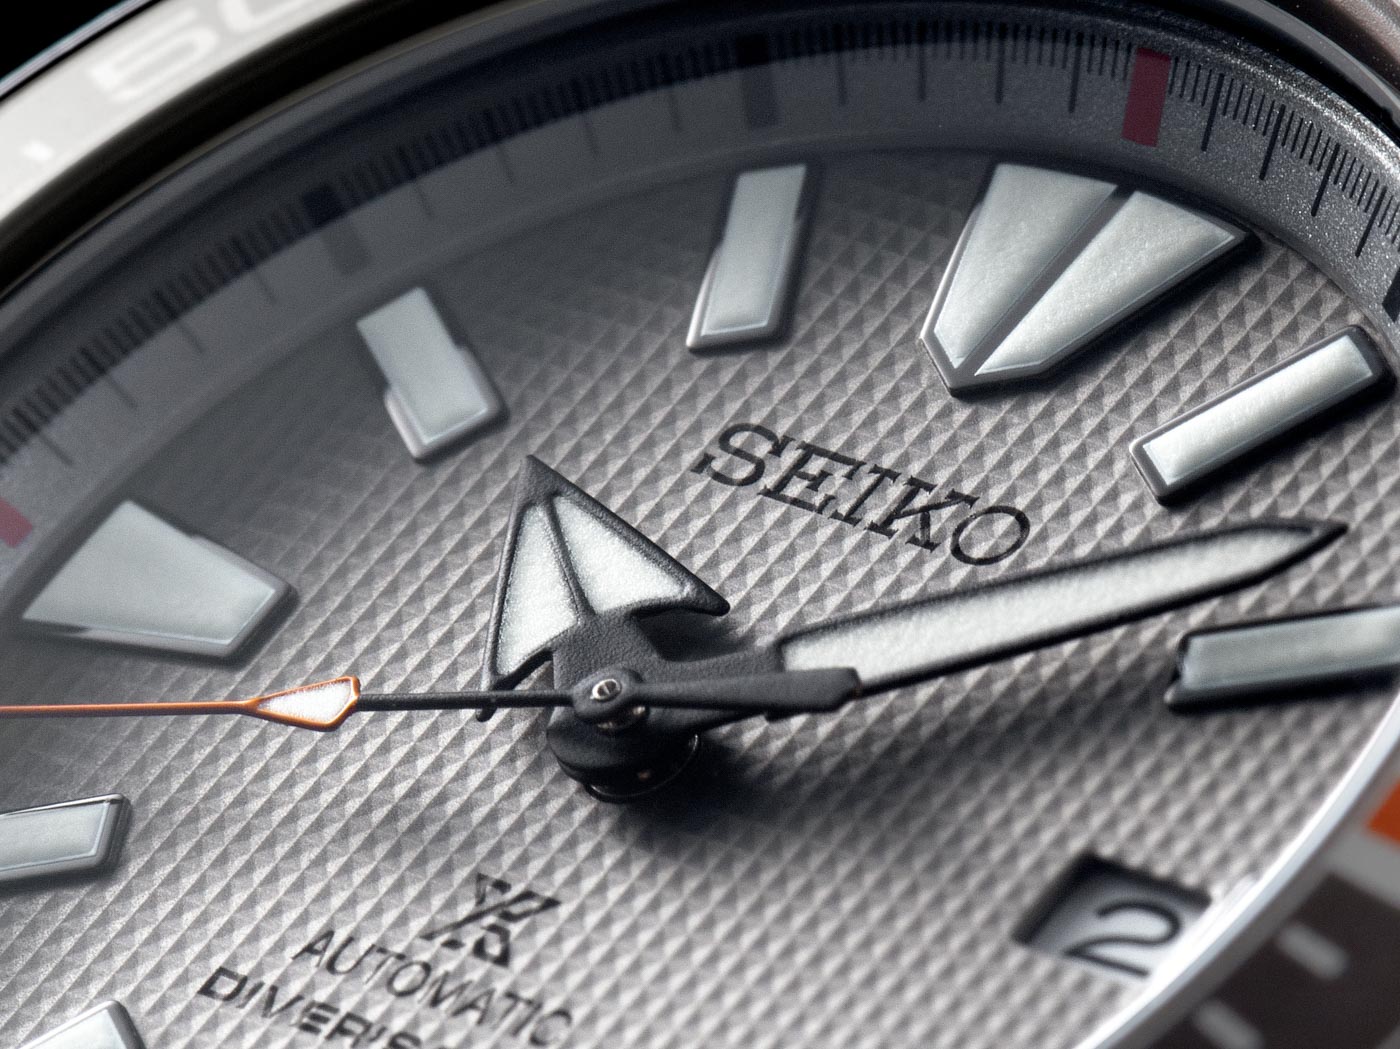 Seiko Prospex 'Dawn Grey' Turtle SRPD01K1 & Samurai SRPD03K1 Europe-Only  Limited Editions – And A Rant | aBlogtoWatch